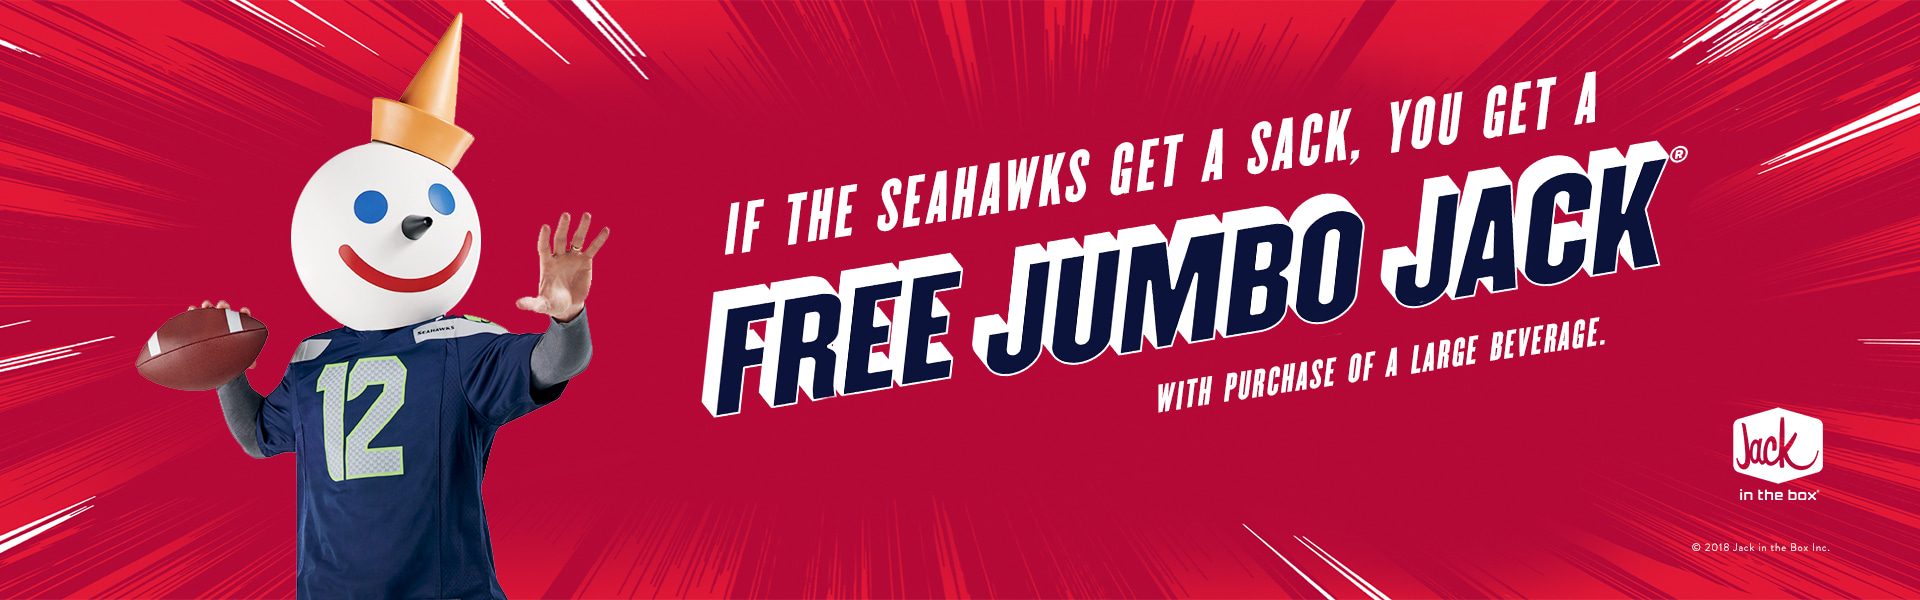 Seattle Seahawks Contests Promotions Seattle Seahawks - free promotions pictures